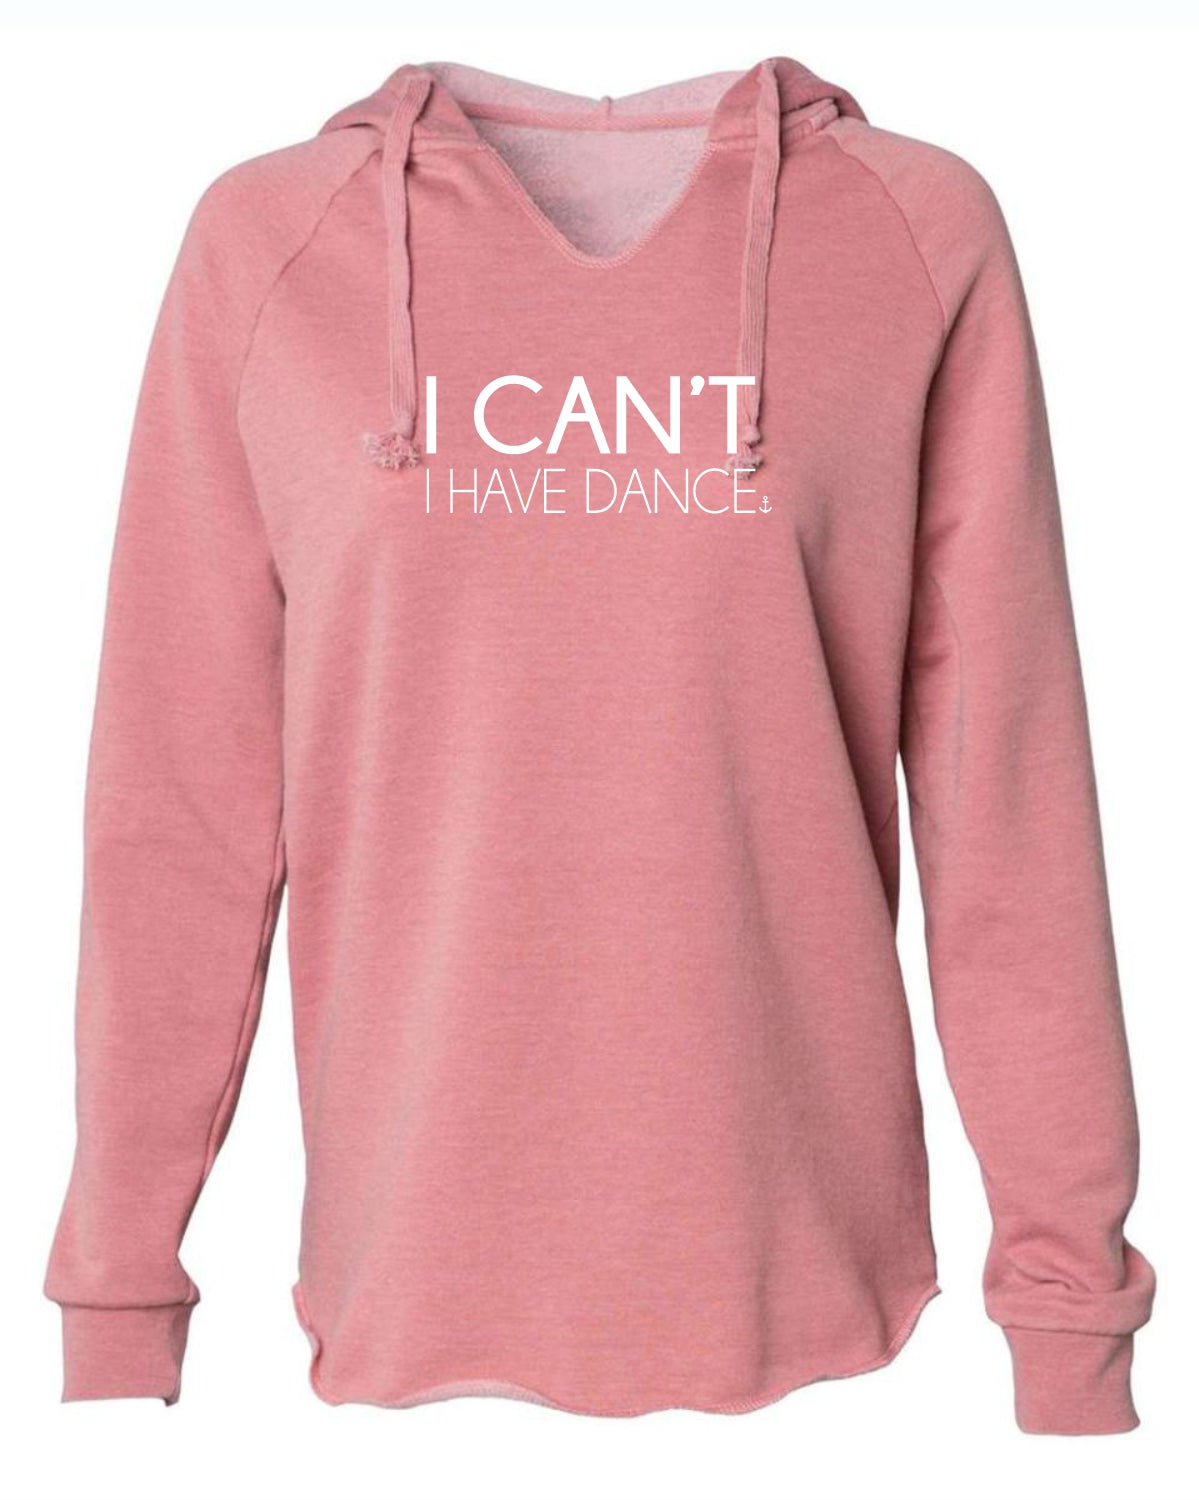 "I Can't. I Have Dance." Ladies' Hoodie